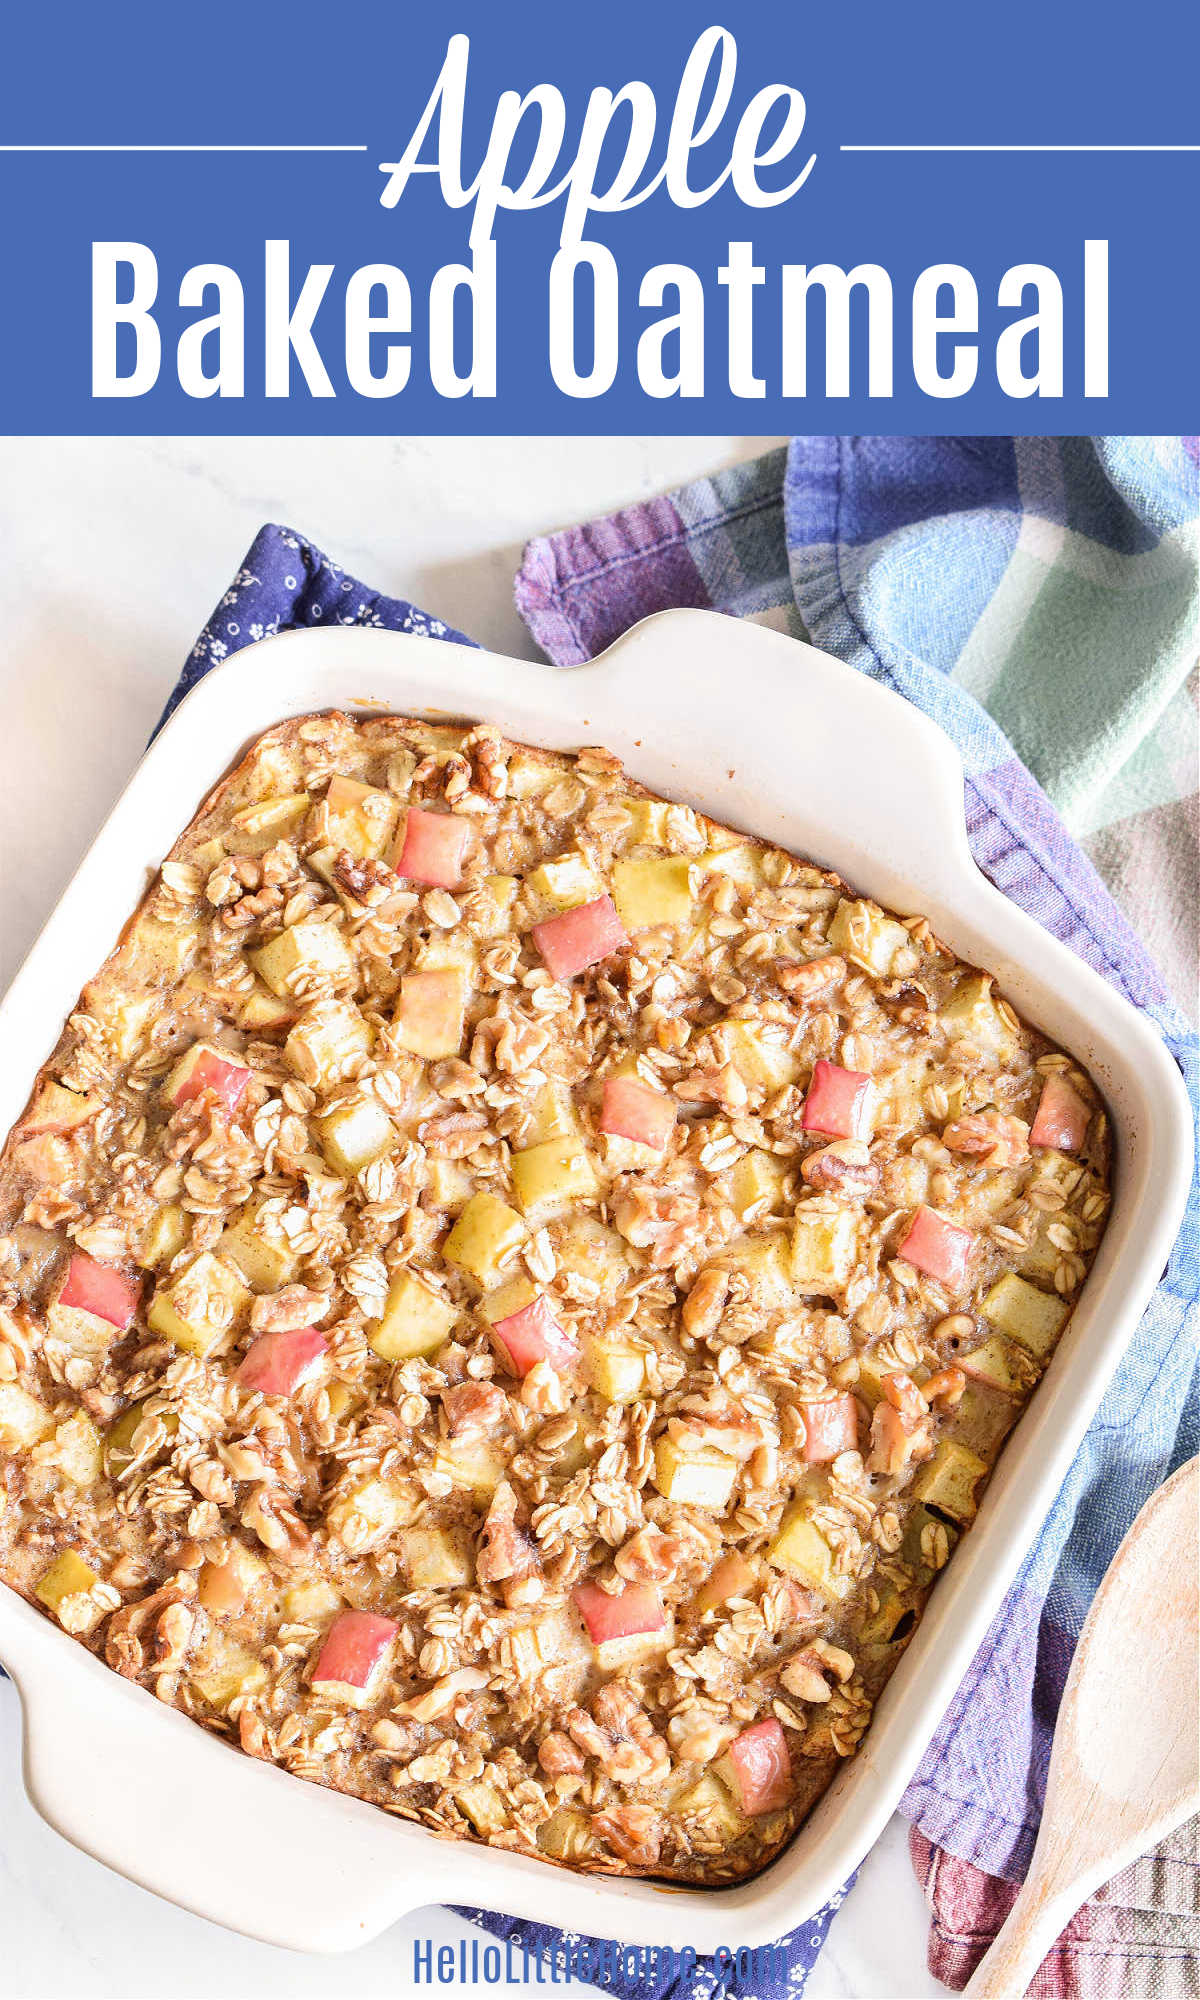 A pan of Apple Cinnamon Baked Oatmeal next to a colorful plaid napkin.